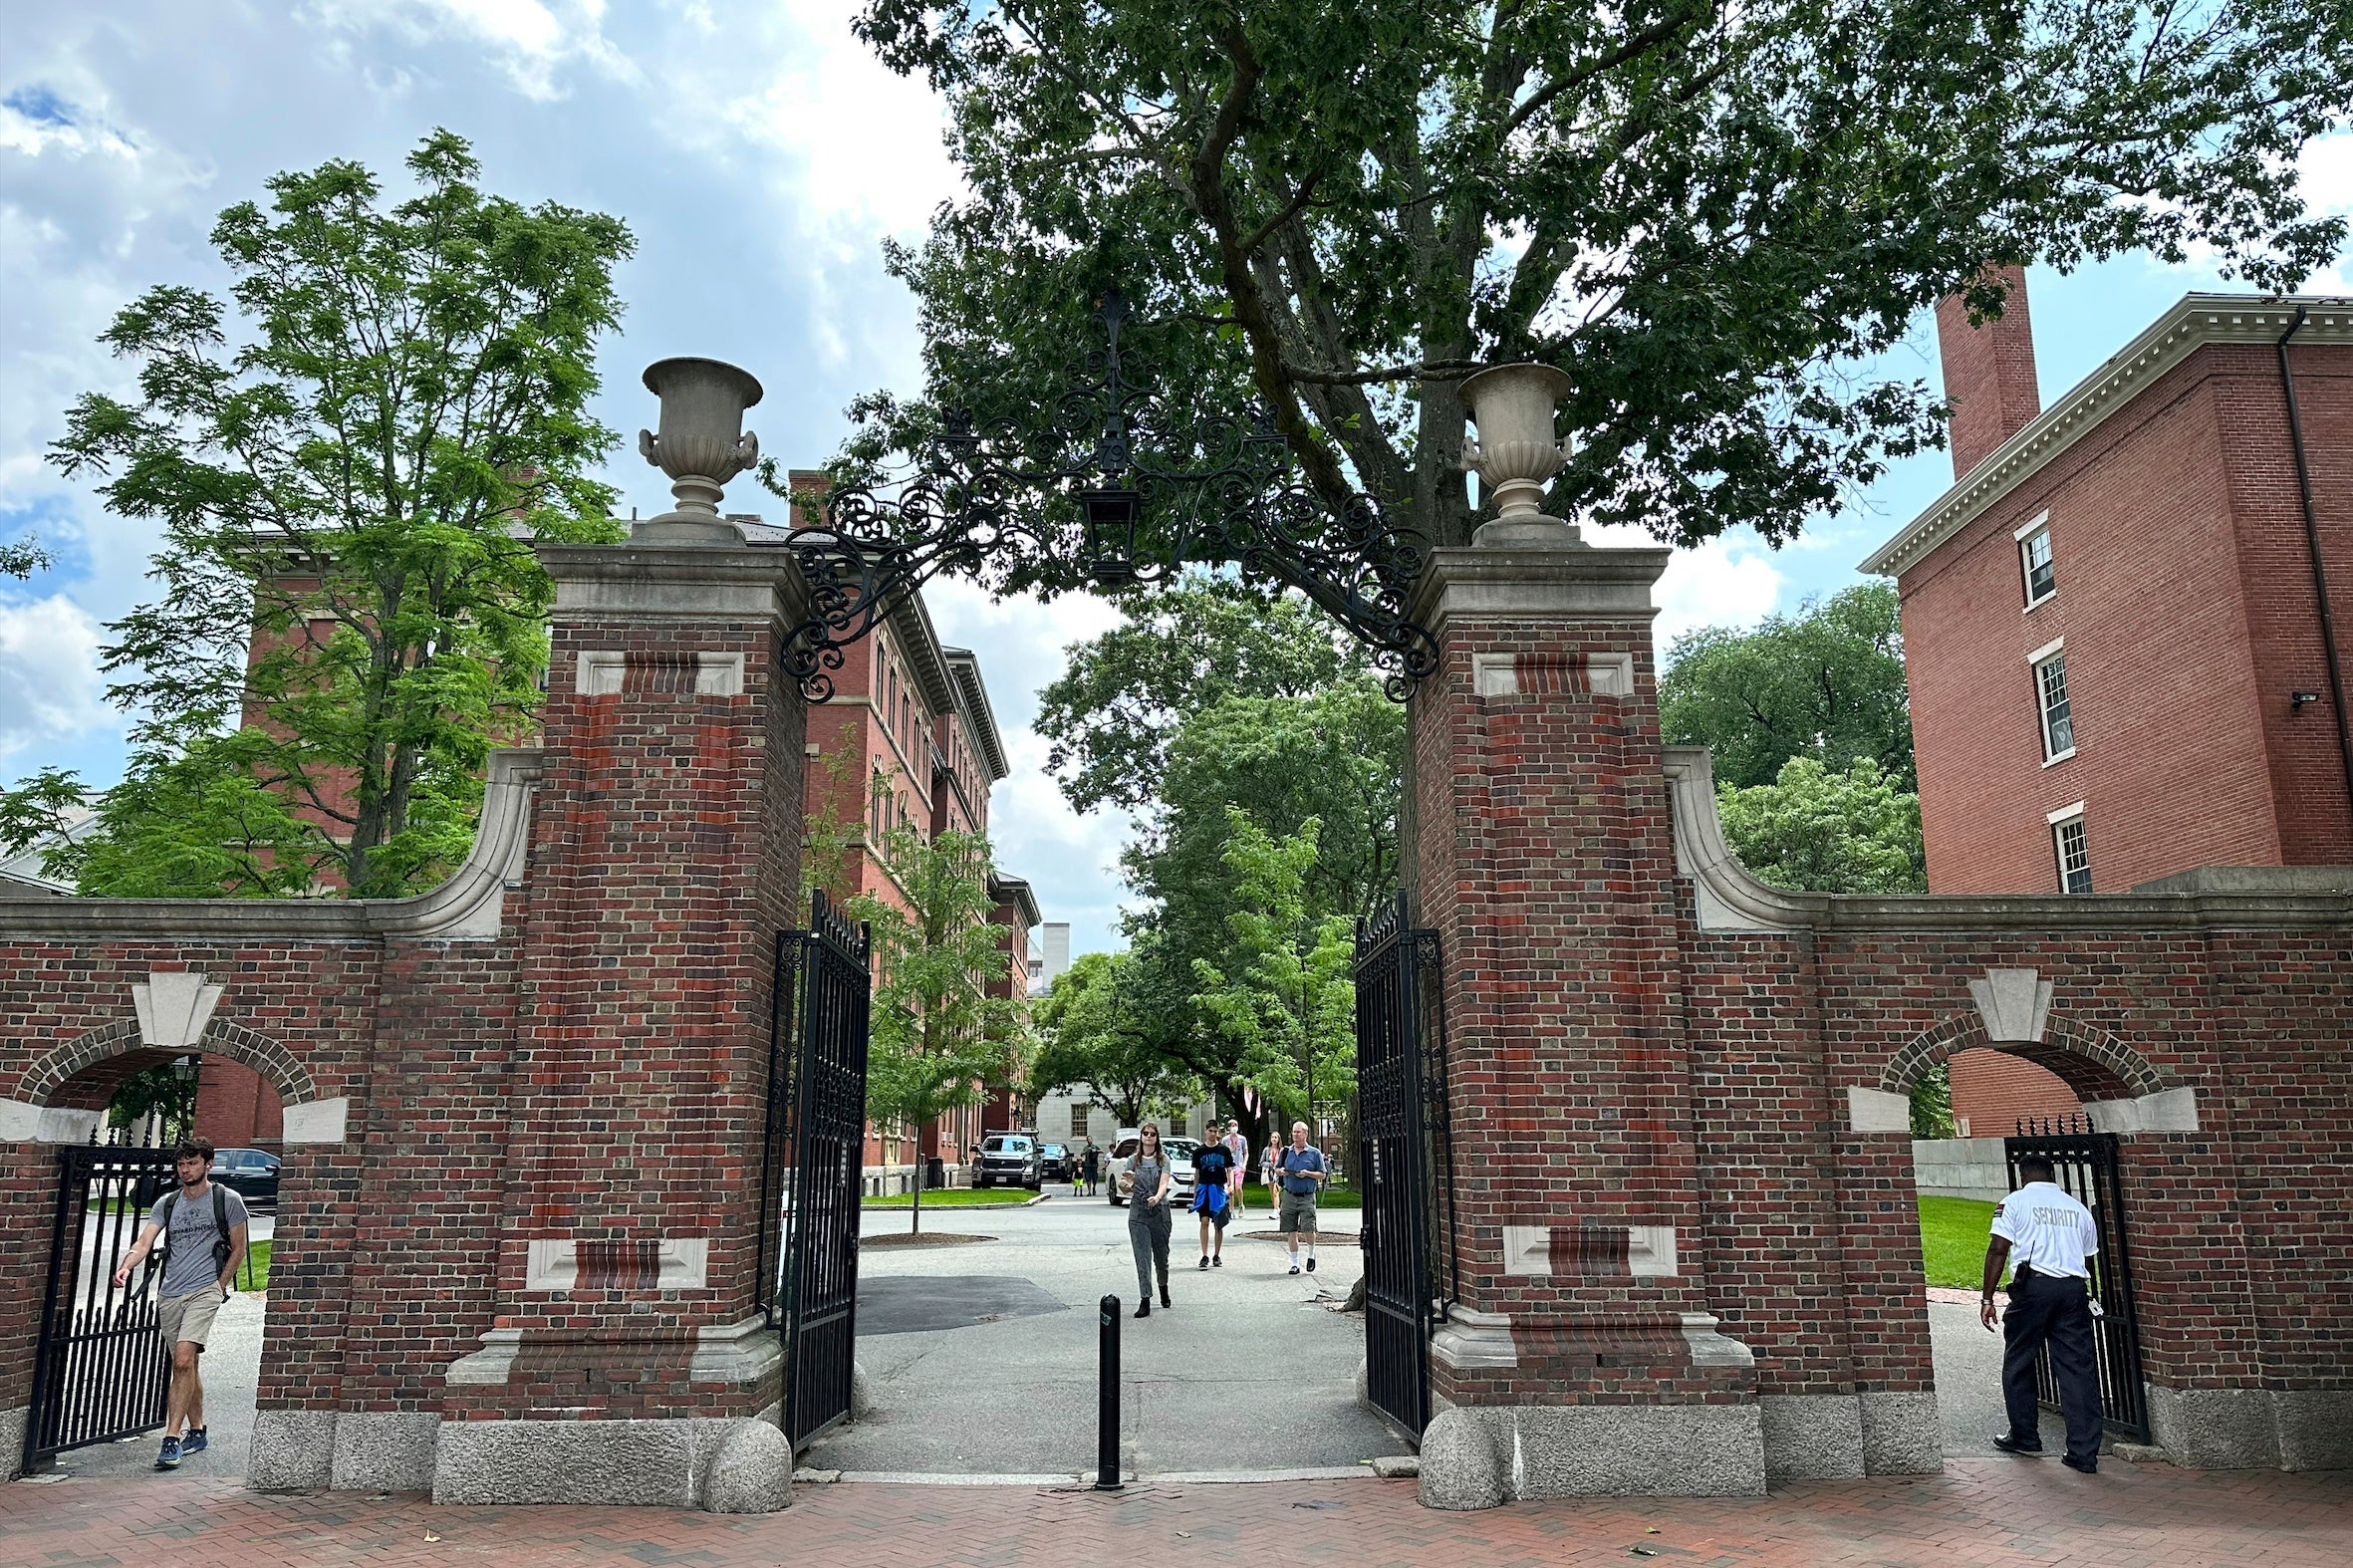 Students at Harvard University had their job offer at a top law firm rescinded after signing letters supporting Palestine